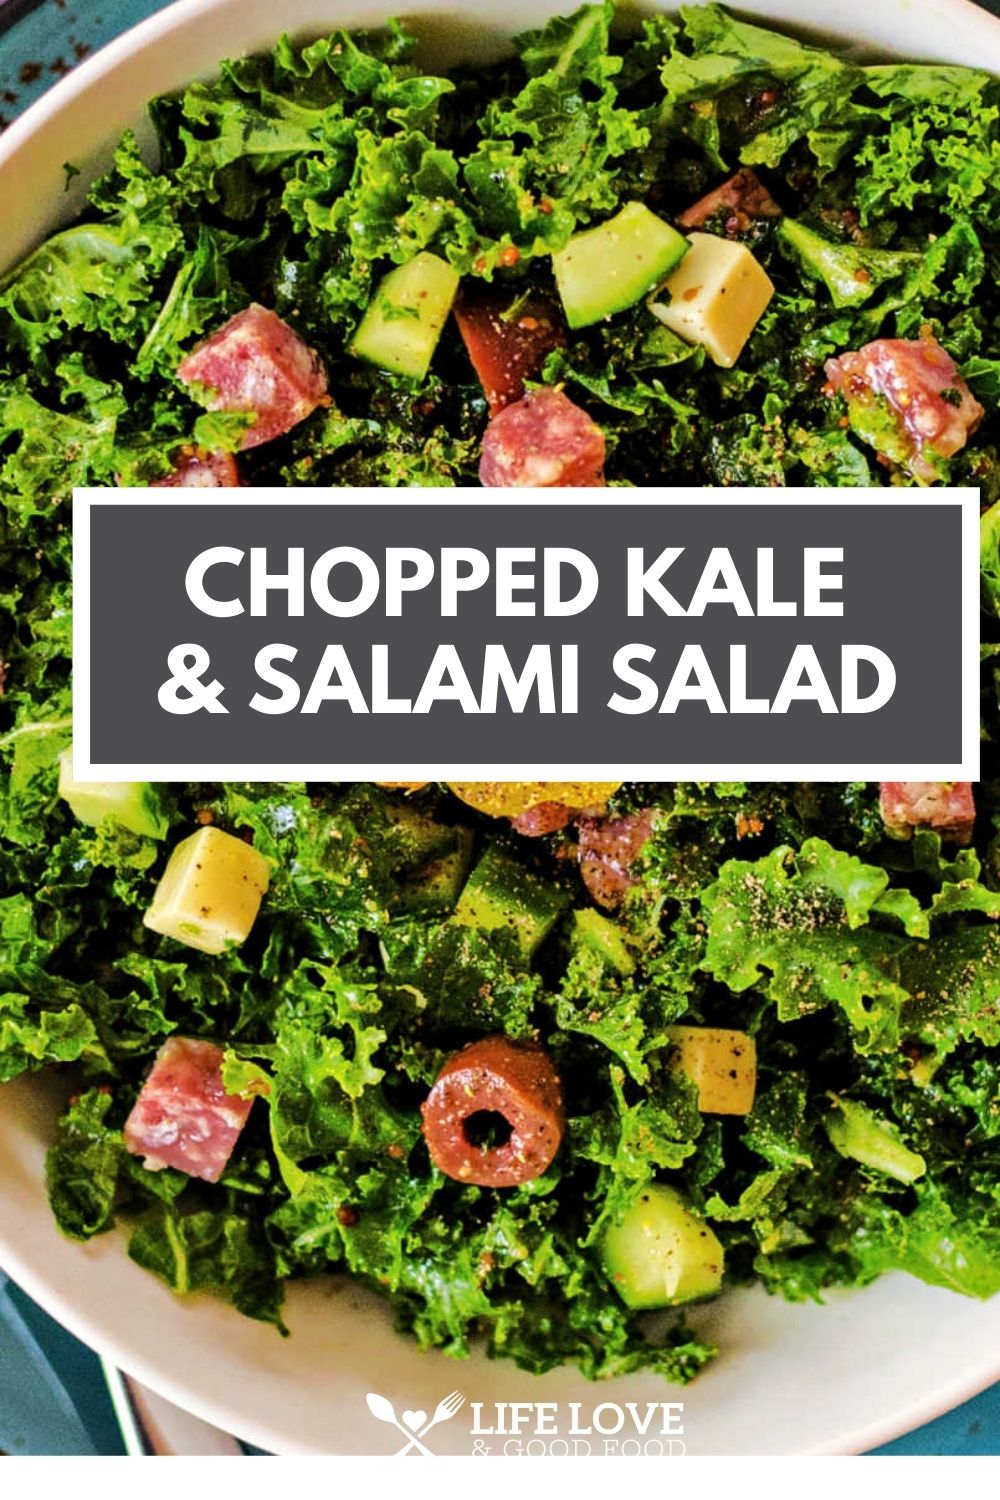 Hearty Chopped Kale Salad with Salami - Life, Love, and Good Food